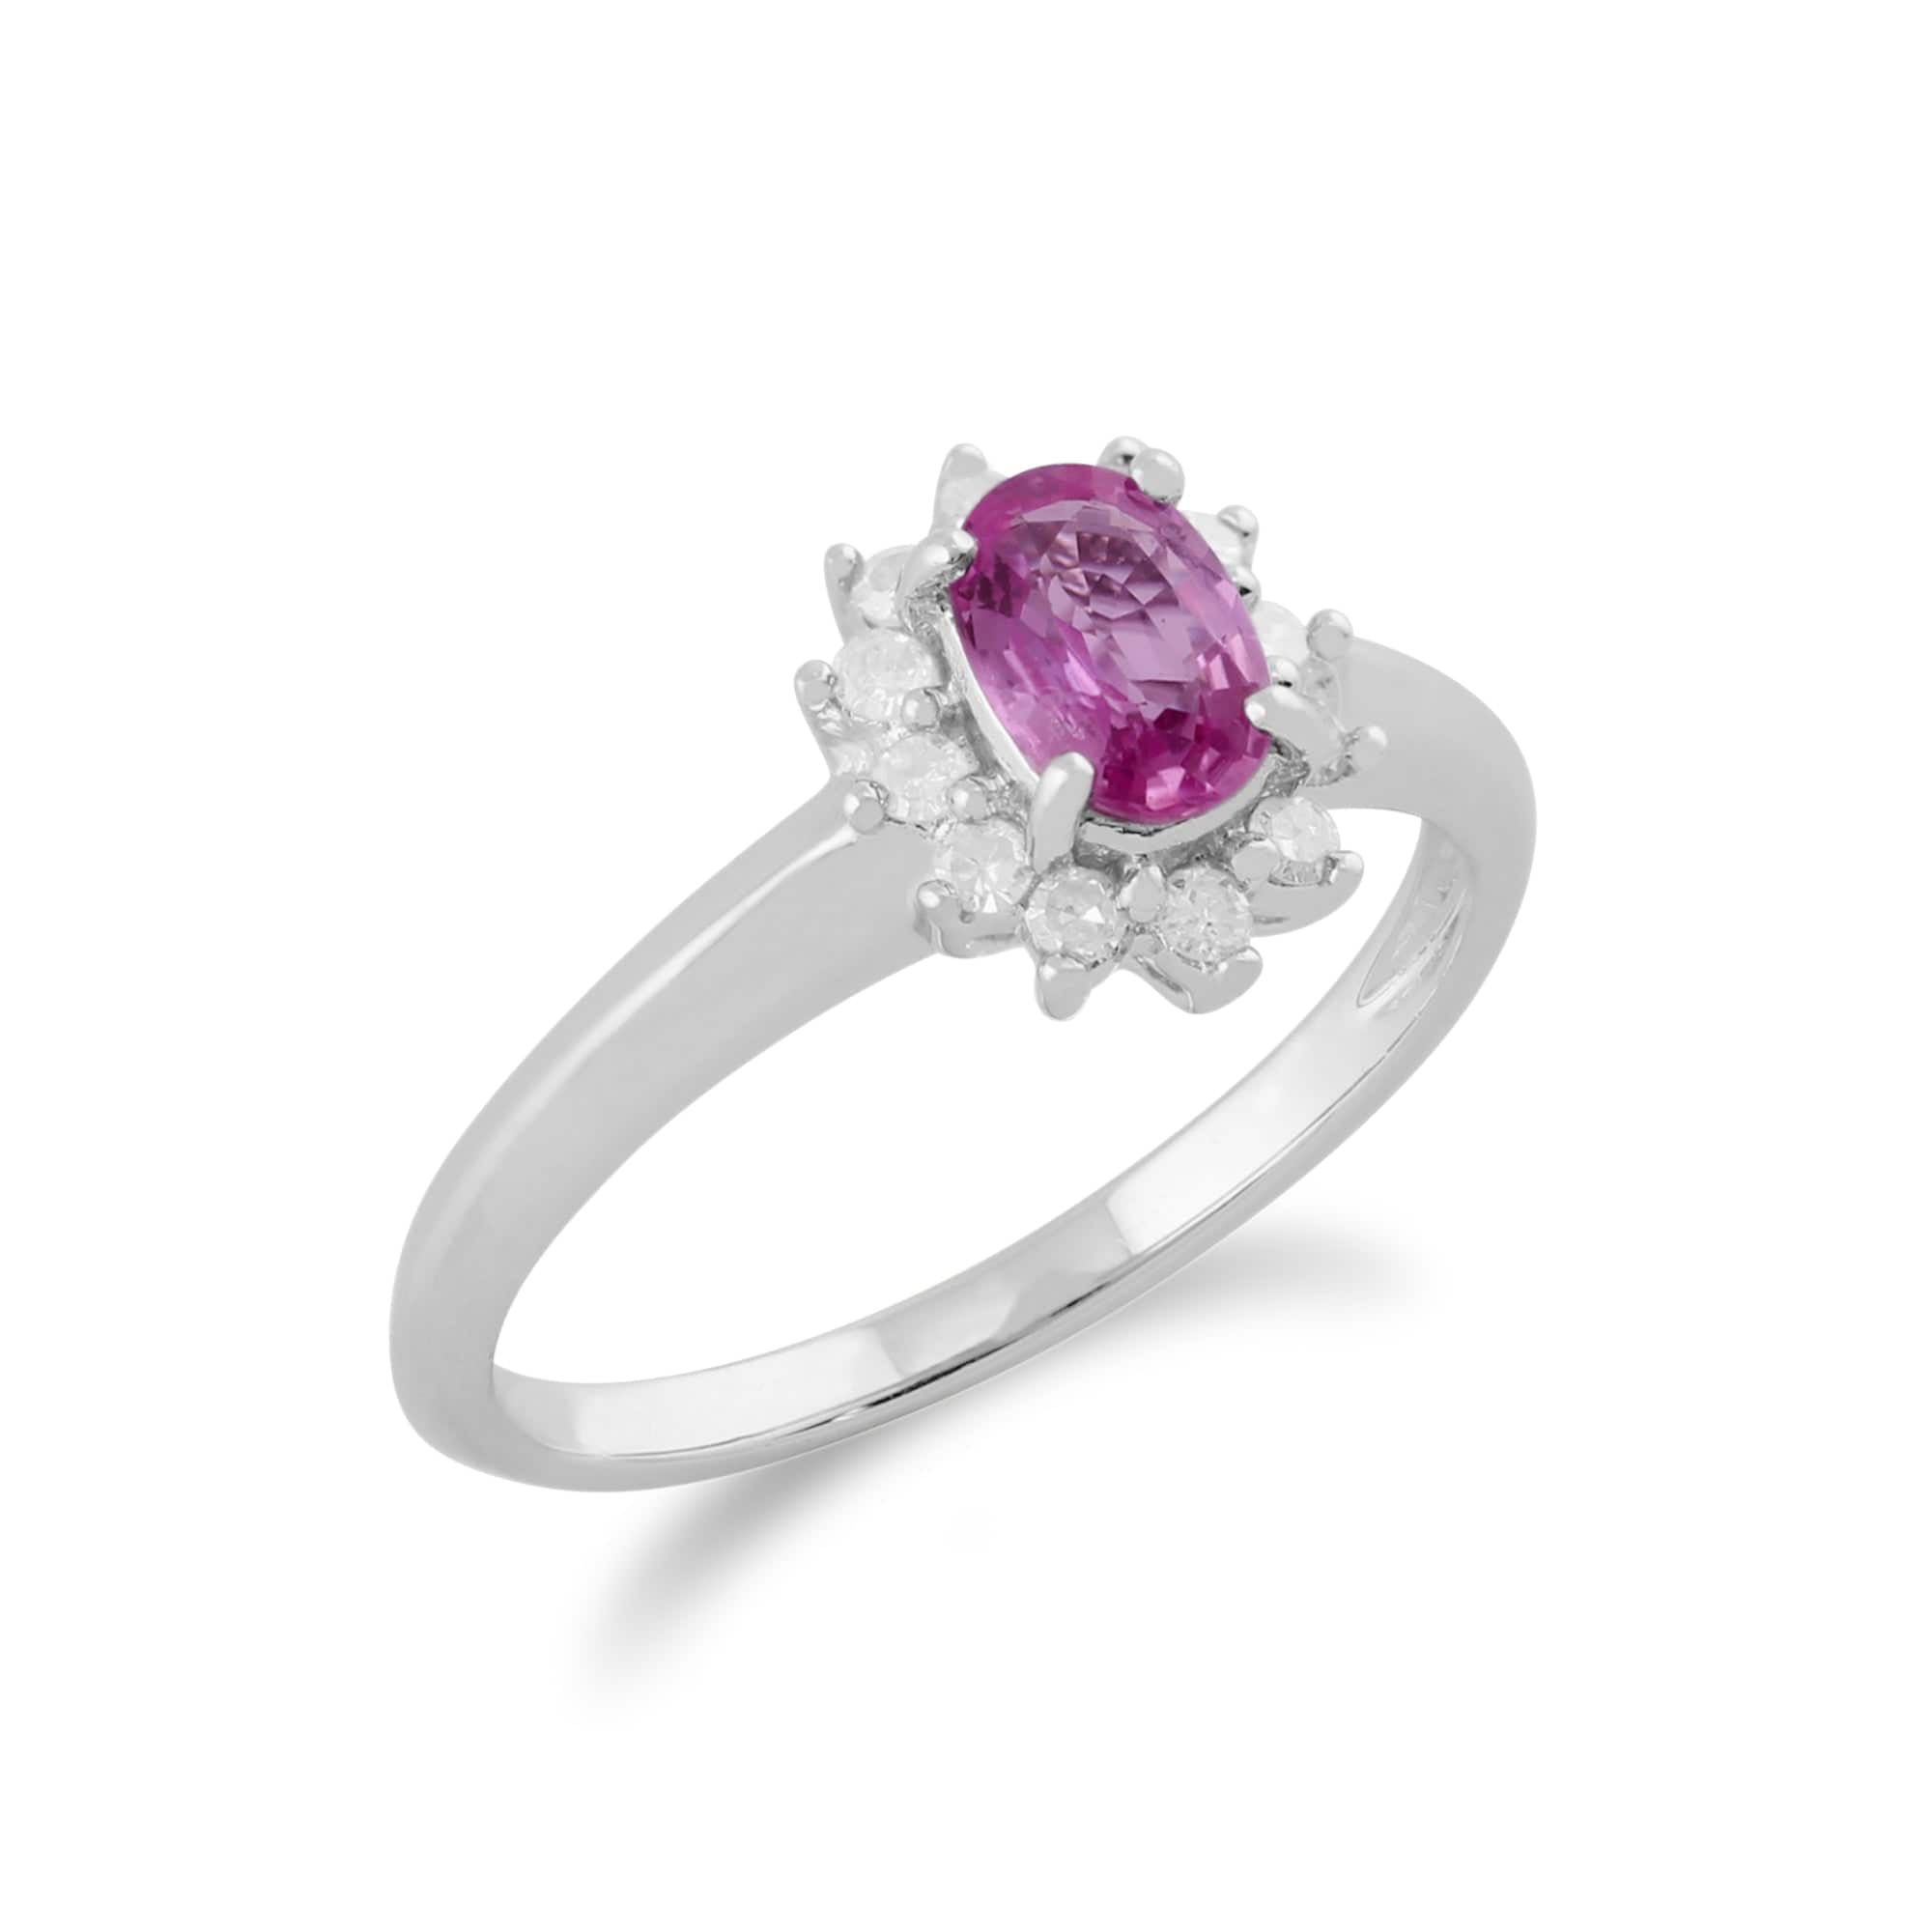 11924 Classic Oval Pink Sapphire & Diamond Cluster Ring in 9ct White Gold 2